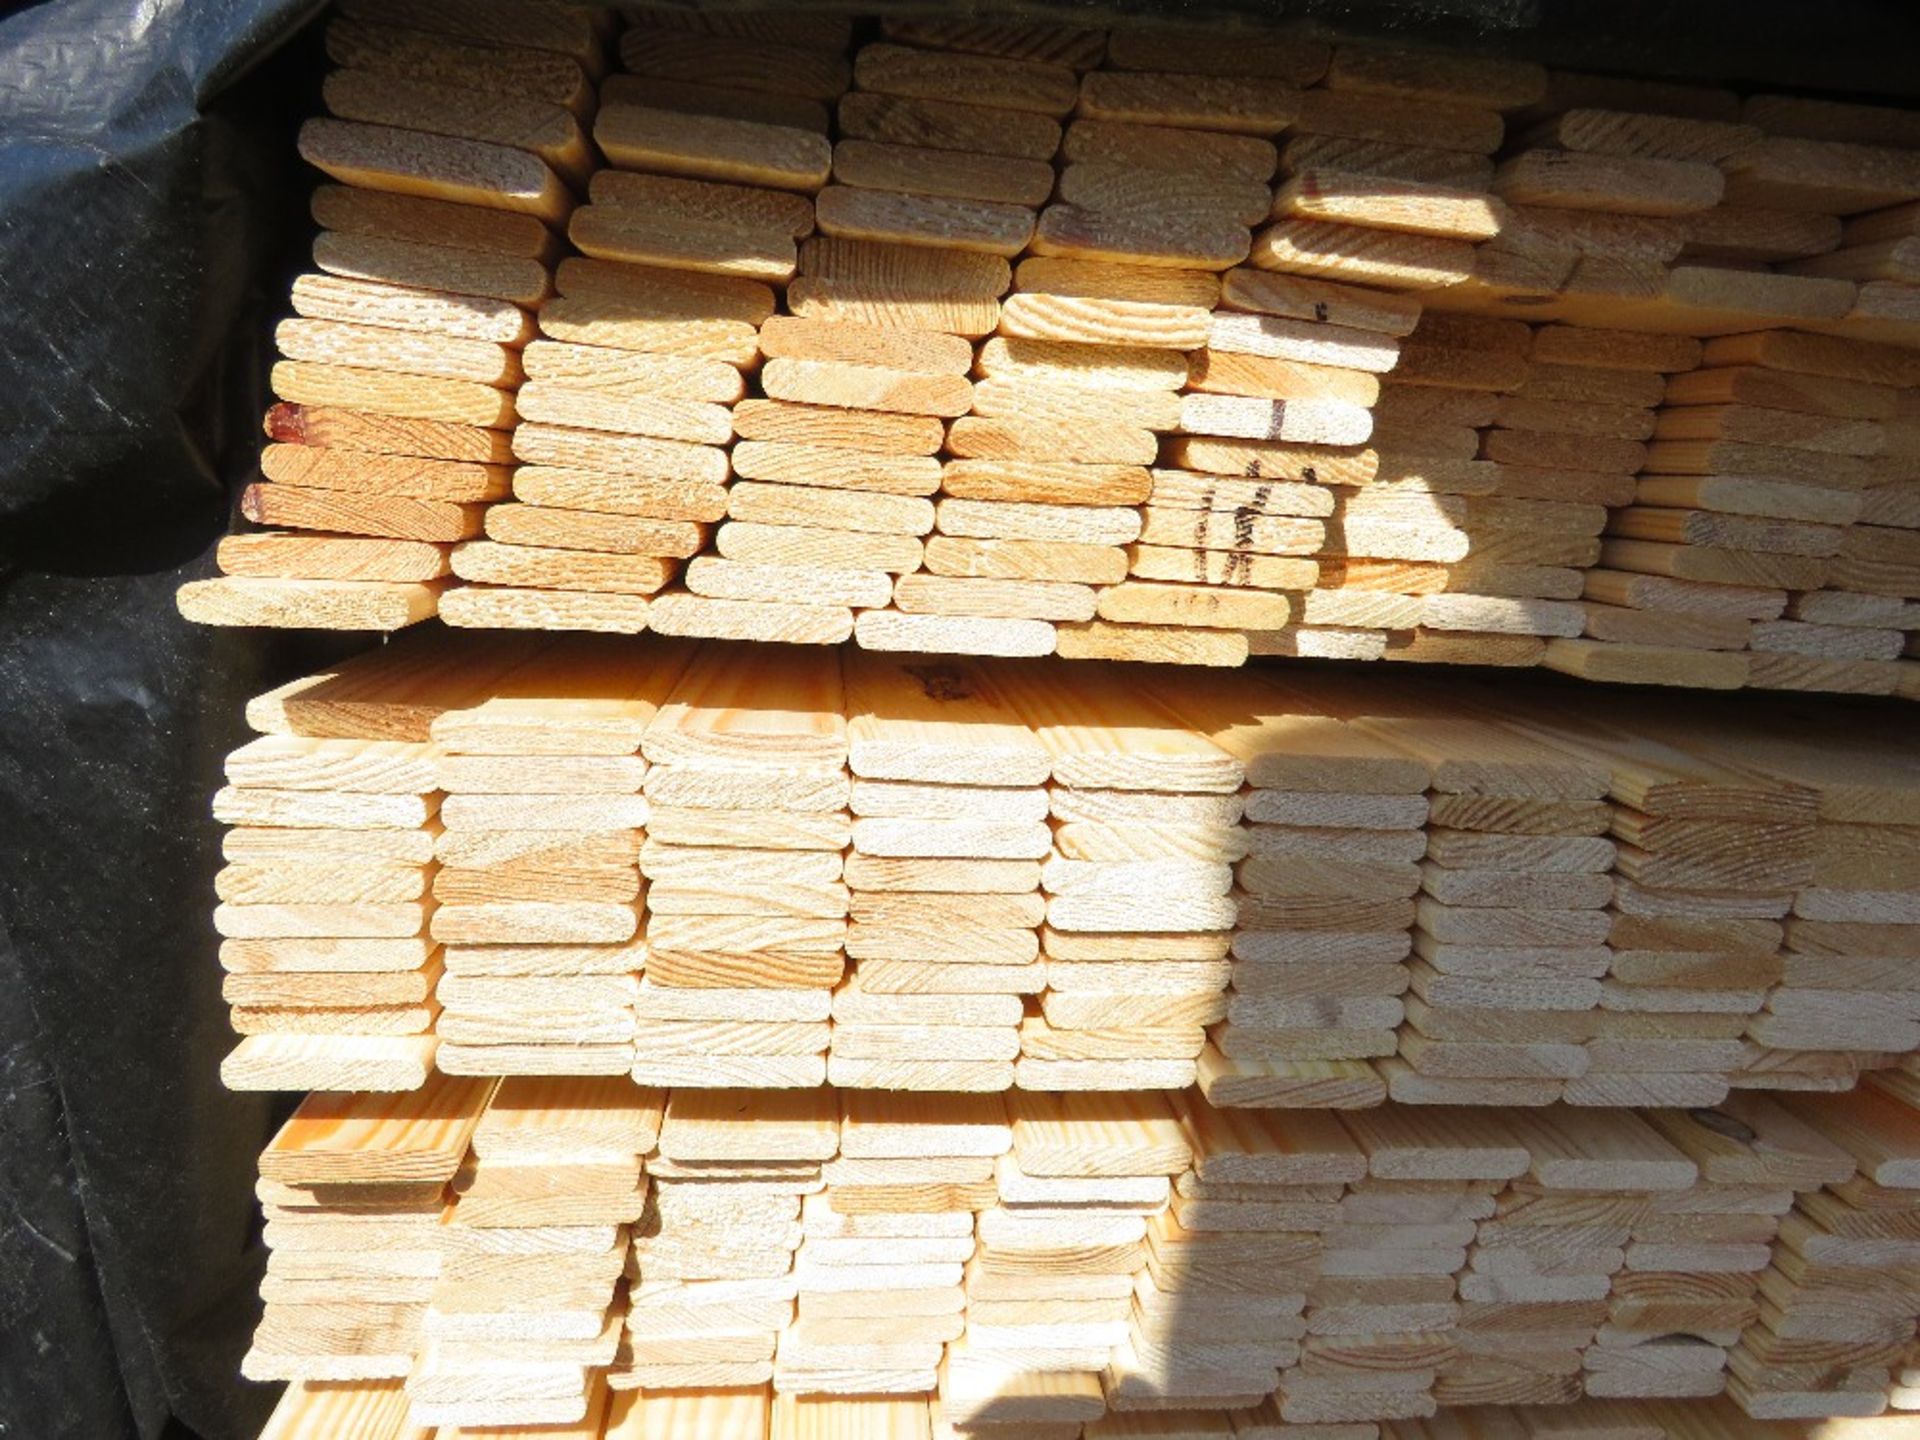 EXTRA LARGE PACK OF UNTREATED WOVEN FENCE SLAT TIMBER CLADDING: 1.74M X 40MM X 8MM APPROX. - Image 3 of 3